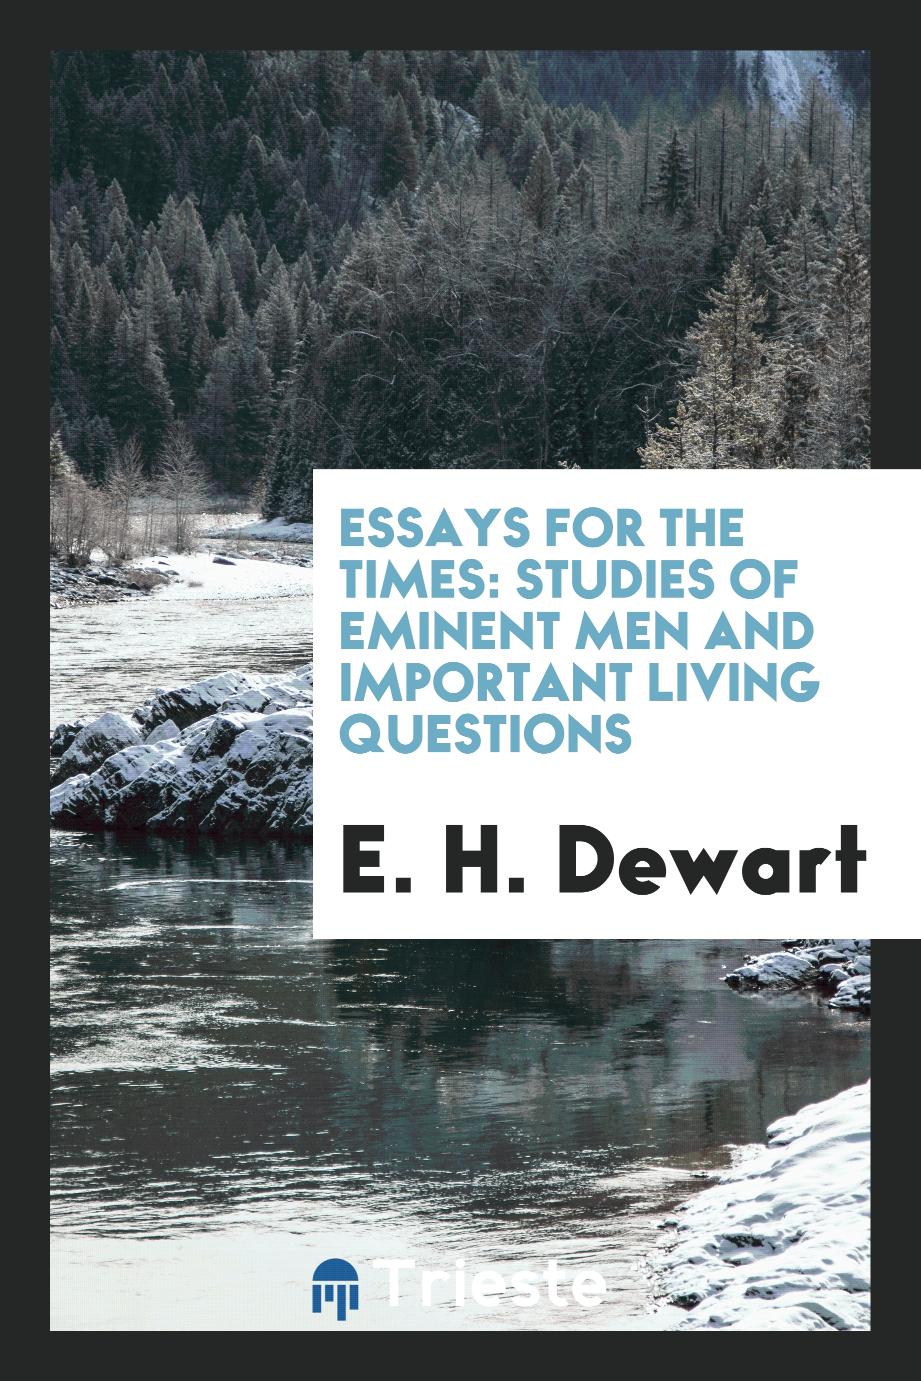 E. H. Dewart - Essays for the times: studies of eminent men and important living questions